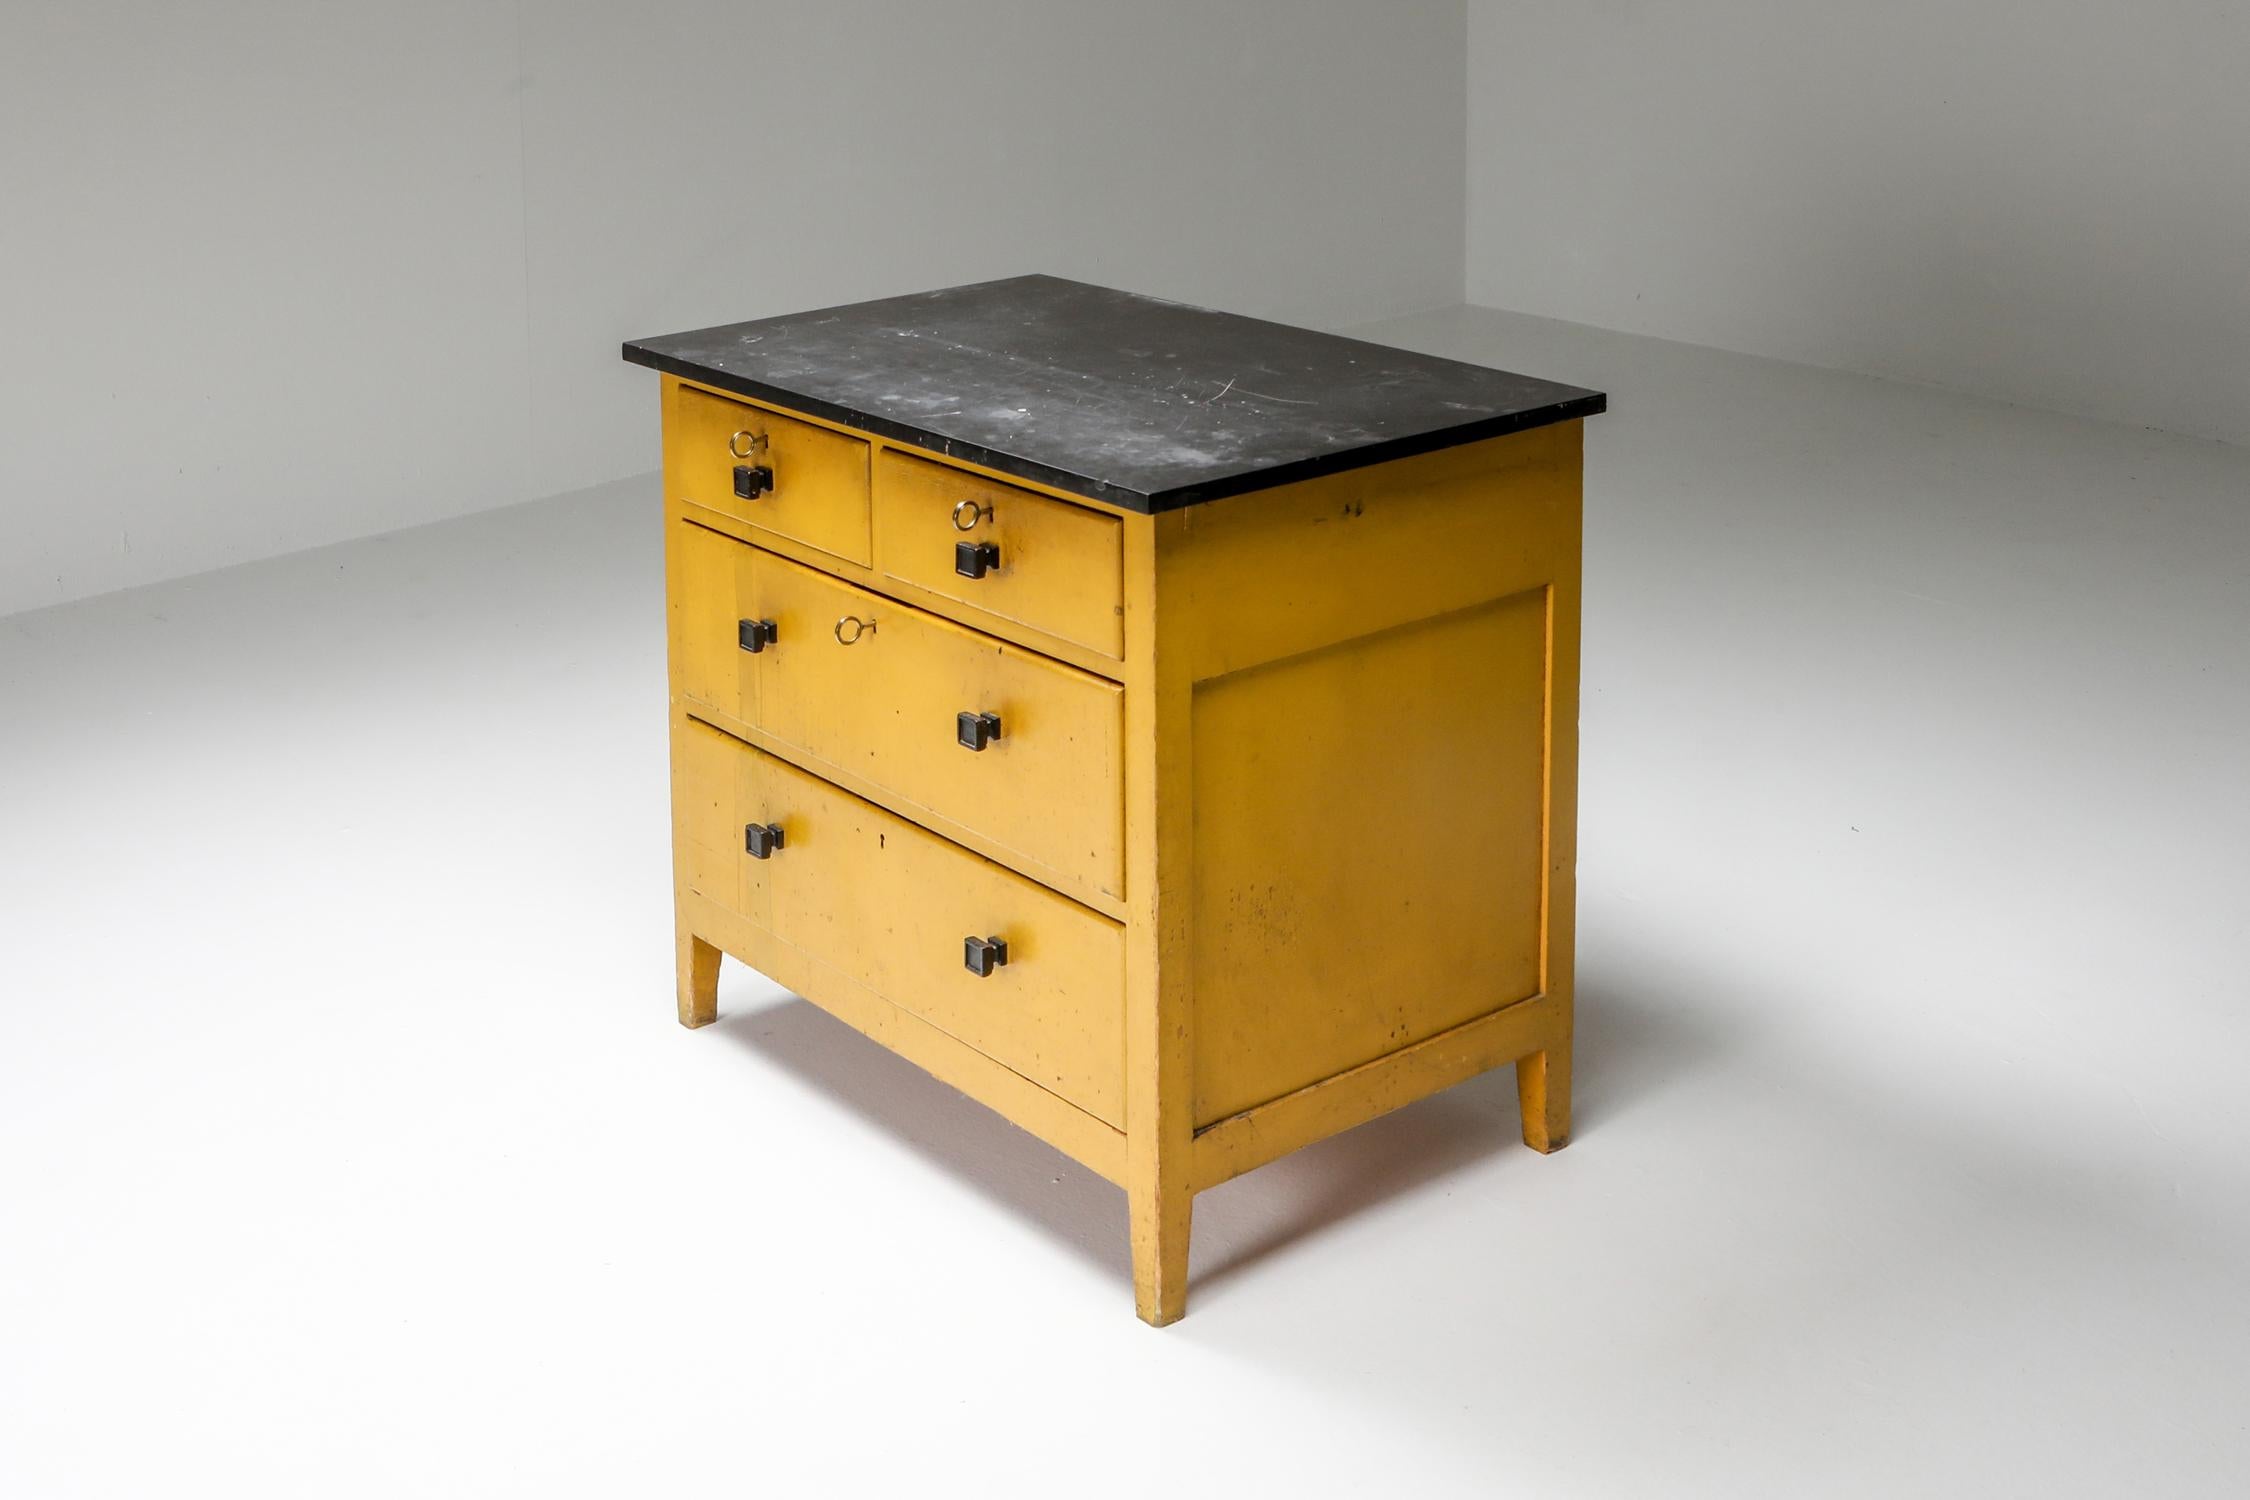 Dutch Modernist Chest of Drawers by Wouda, 1924